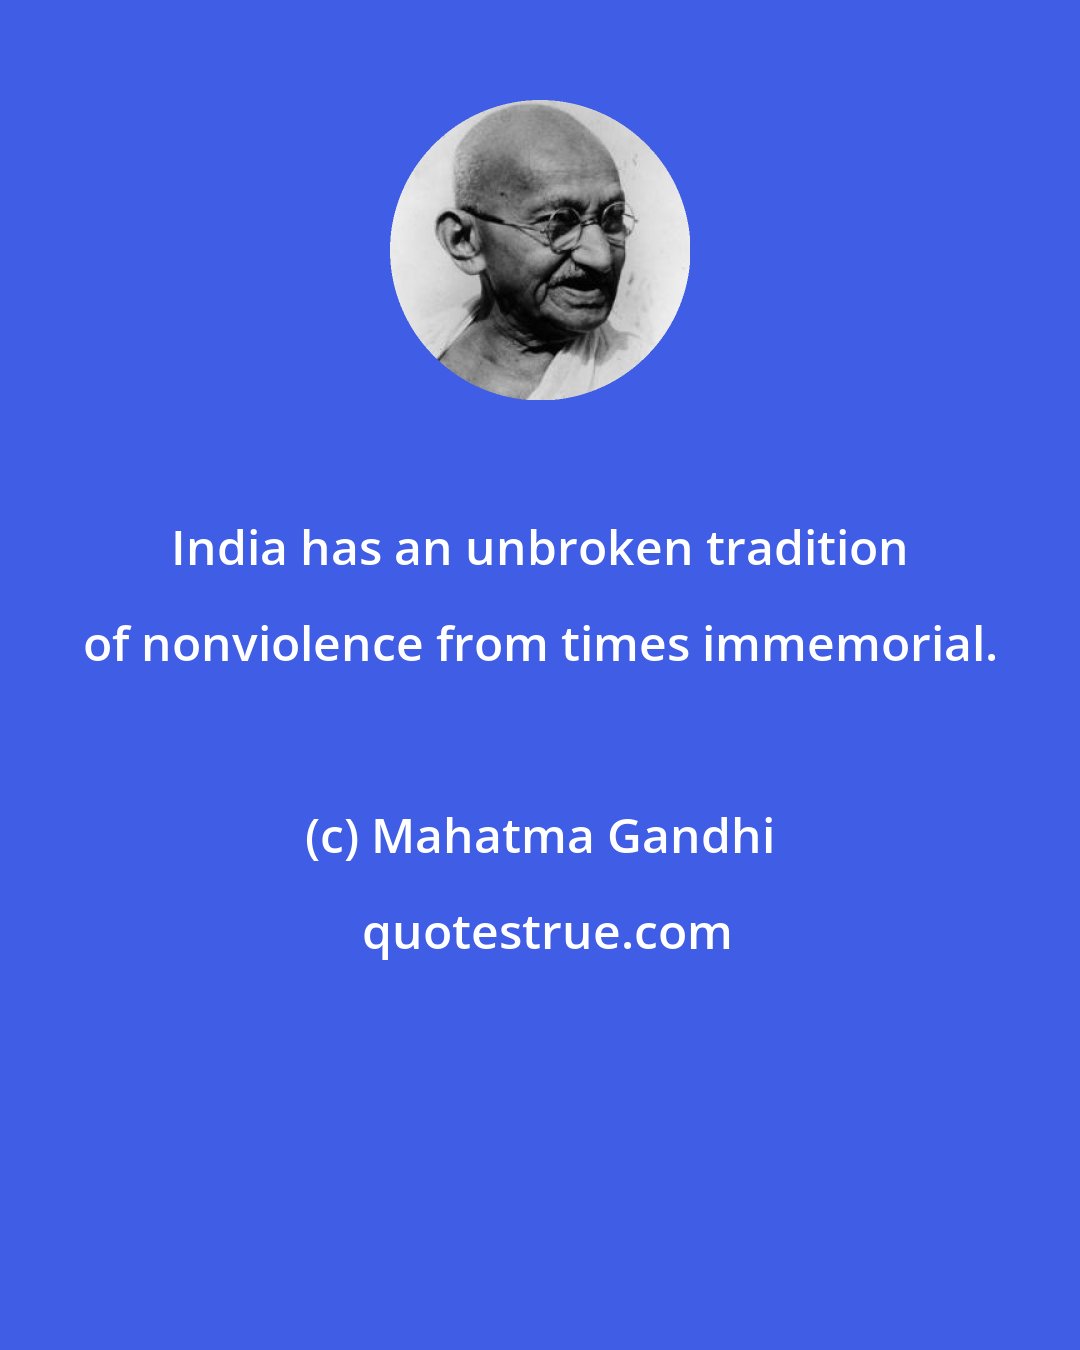 Mahatma Gandhi: India has an unbroken tradition of nonviolence from times immemorial.